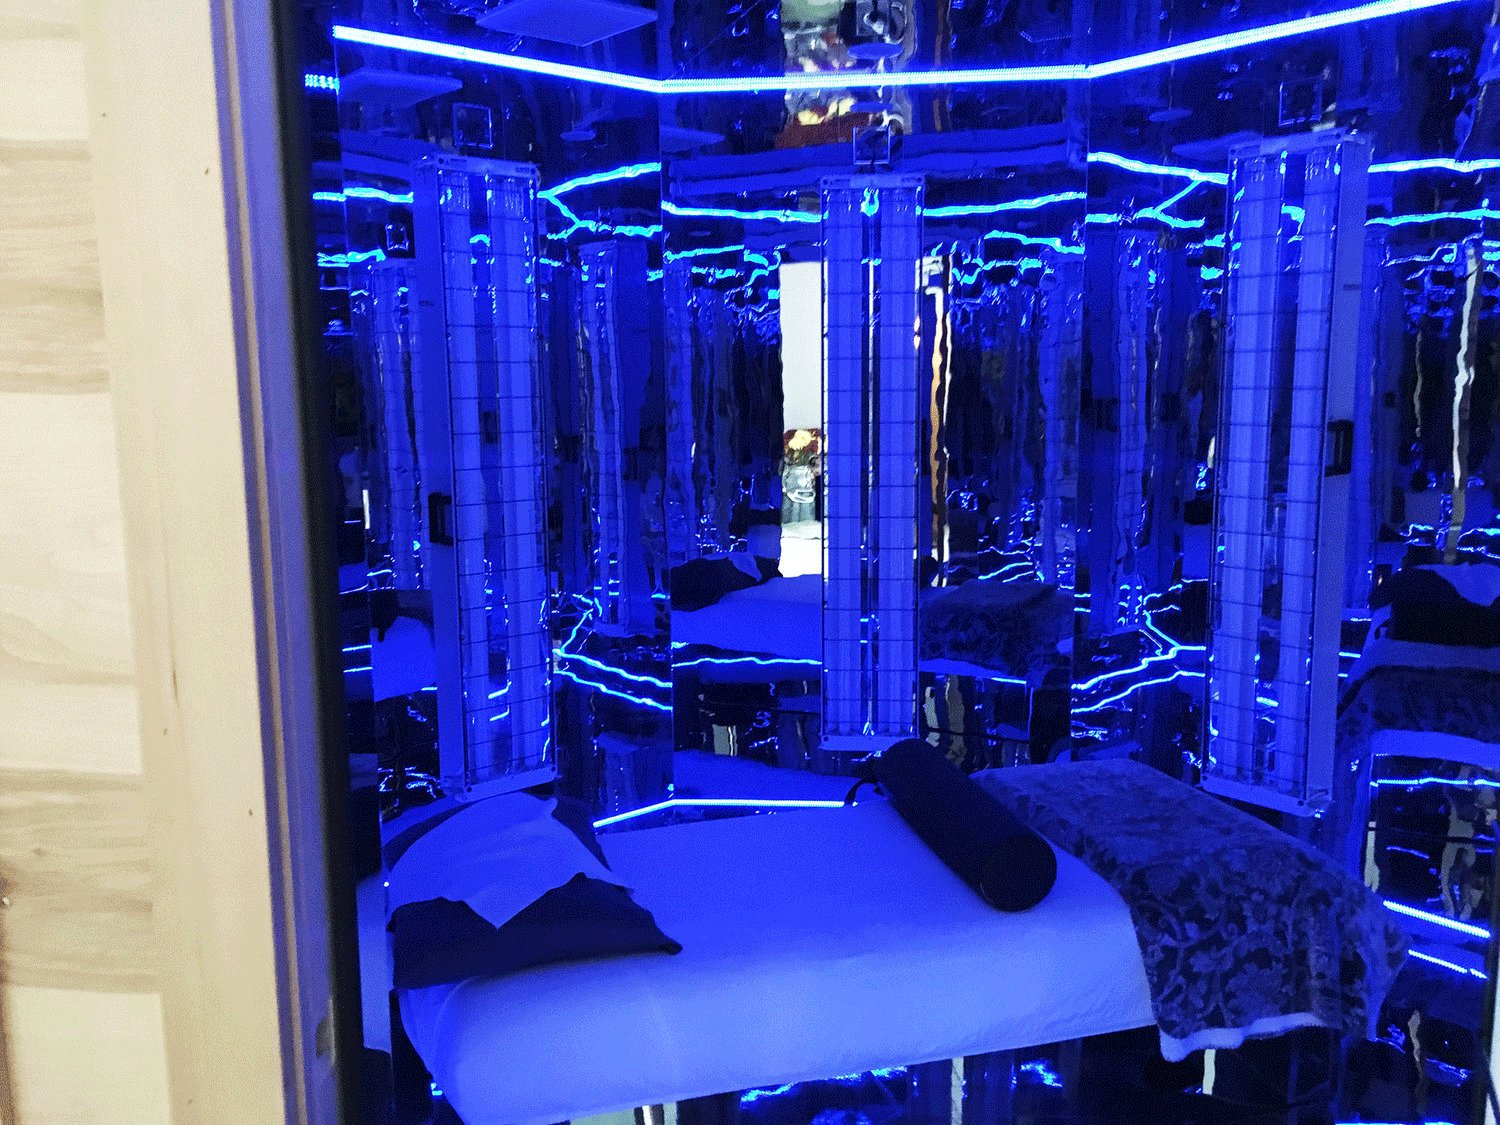 The interior of the Blu Room is pictured. Invented by JZ Knight, Blu Room proponents say it combines UVB medical light and Tesla Geometry.